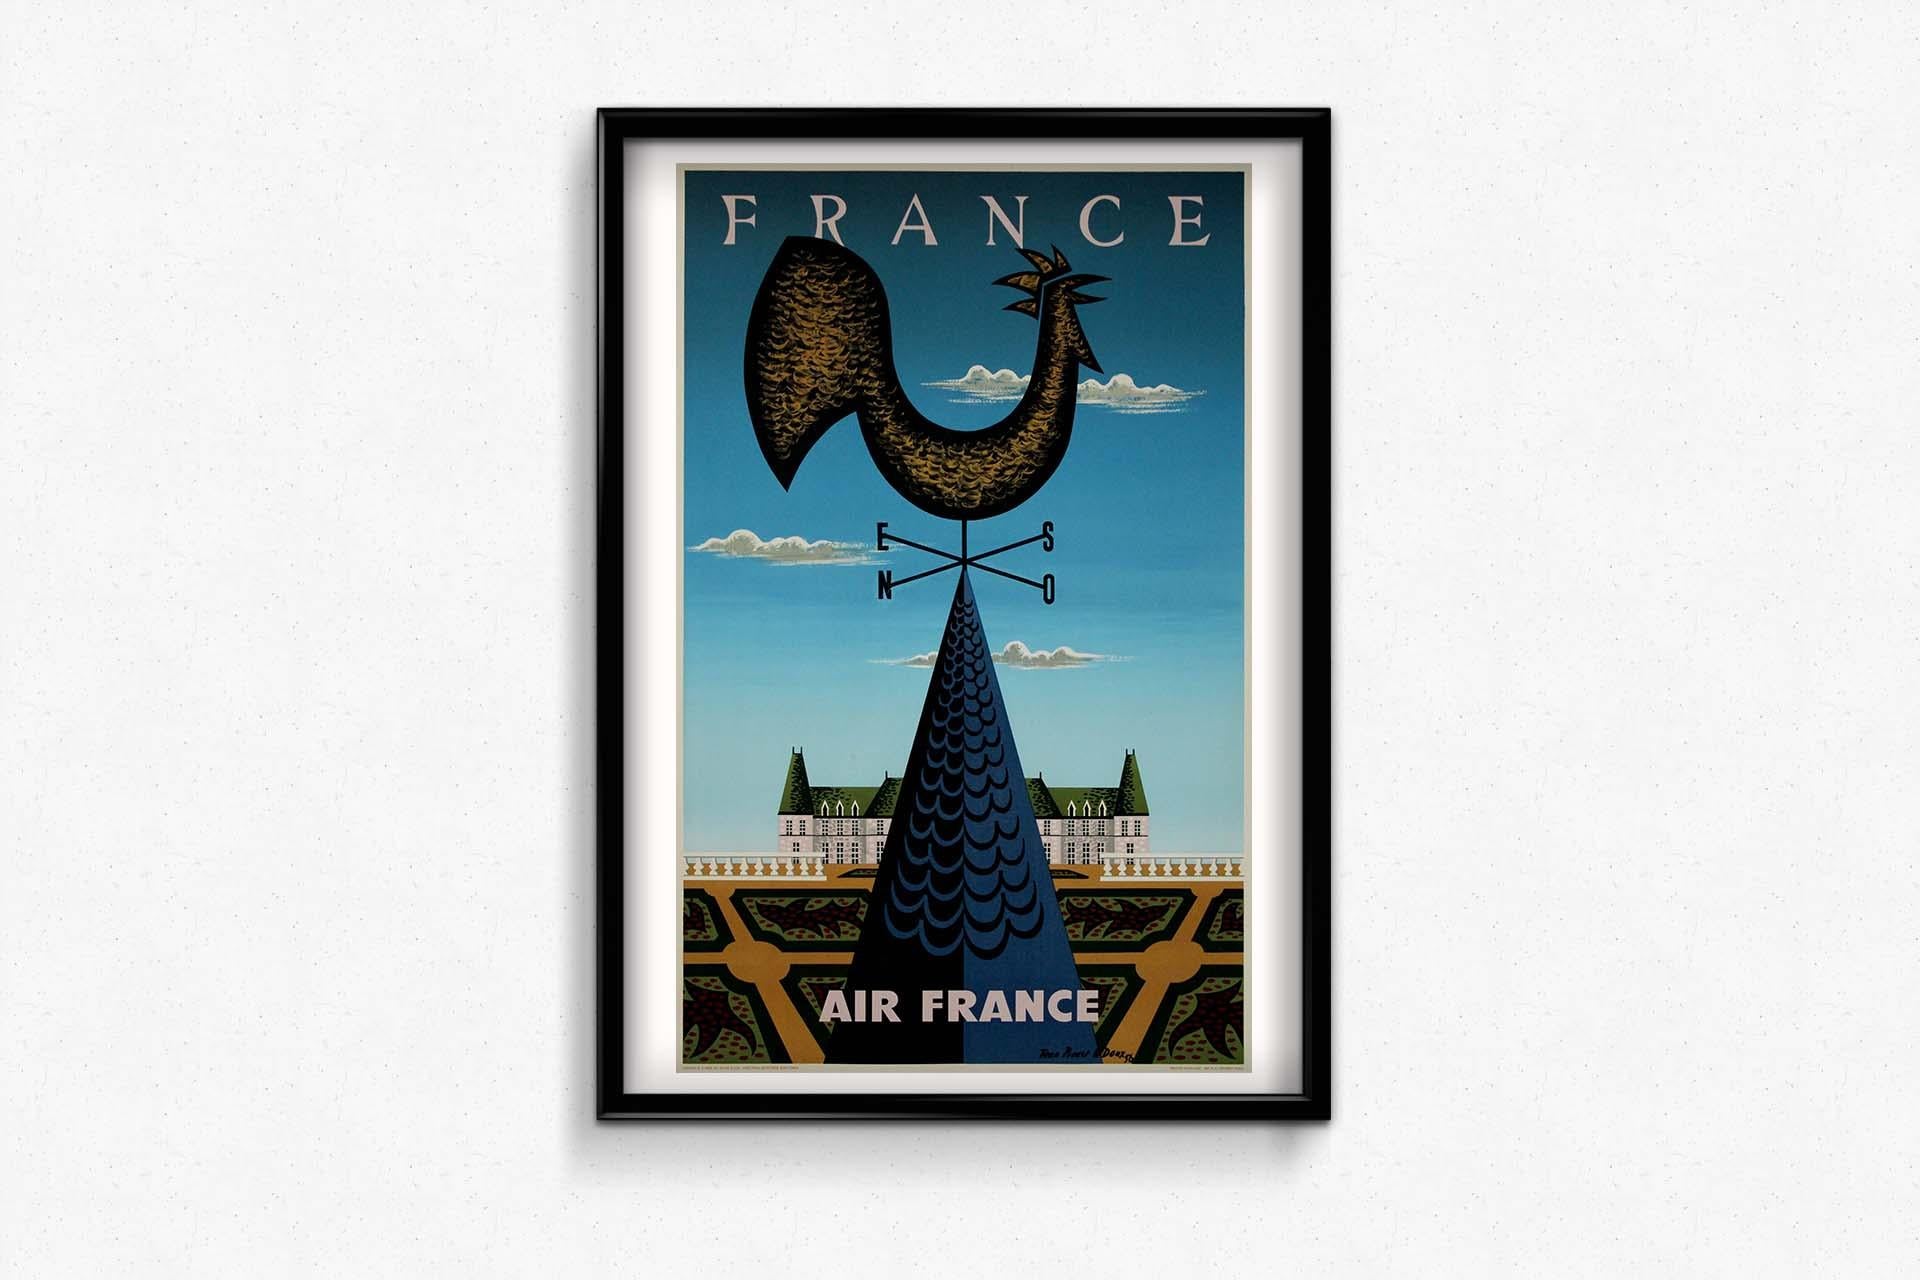 In the golden age of glamorous air travel, artist Jean Picart le Doux crafted a masterpiece that not only encapsulates the elegance and sophistication of an era but also pays homage to Air France's commitment to making France accessible to the